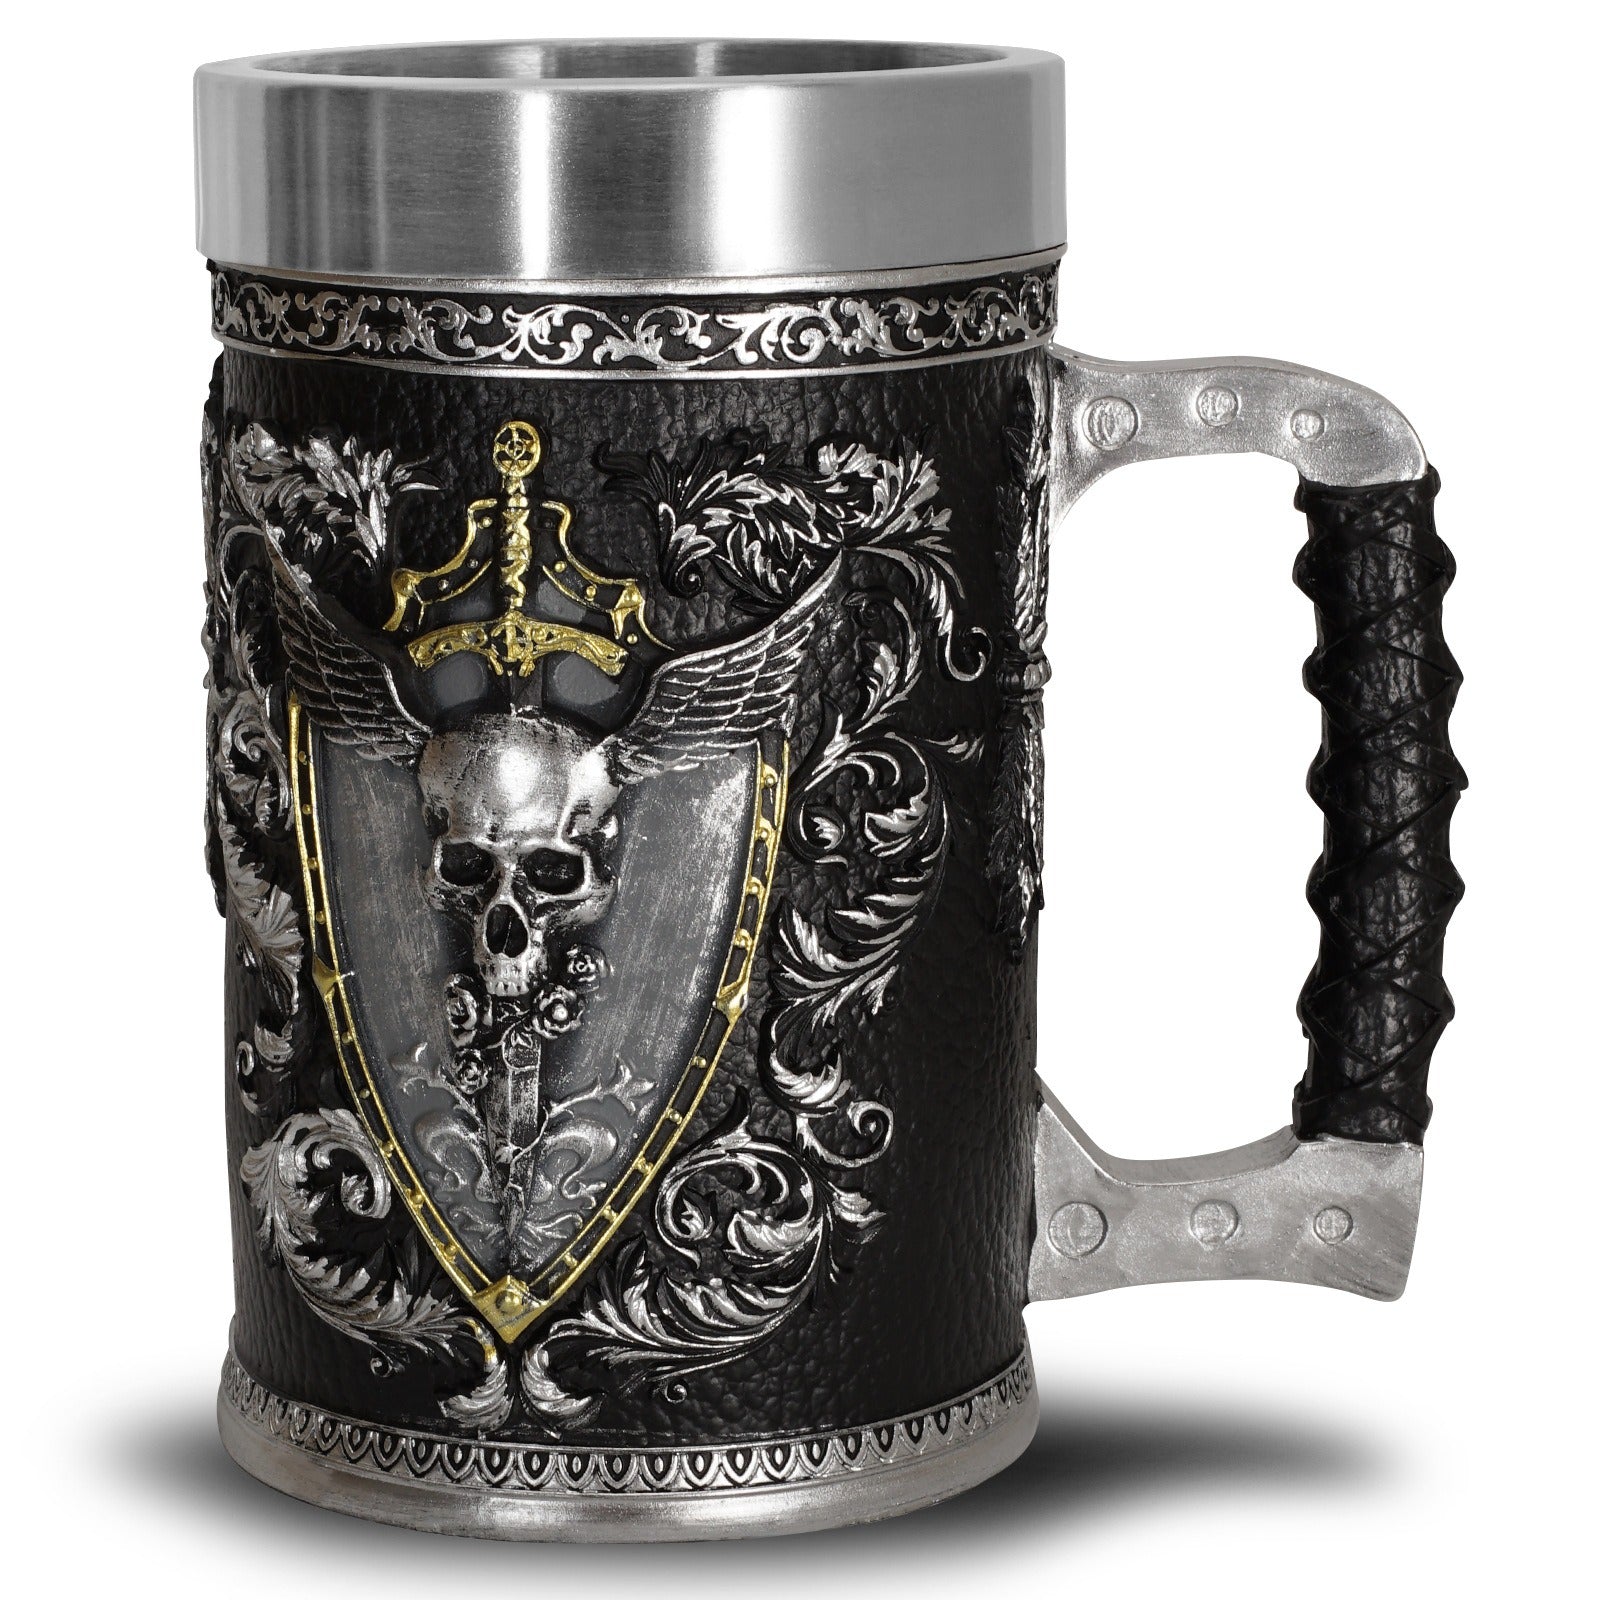 Pirate Beer Cup Large Water Cup Stainless Steel Cup Home-clothes-jewelry